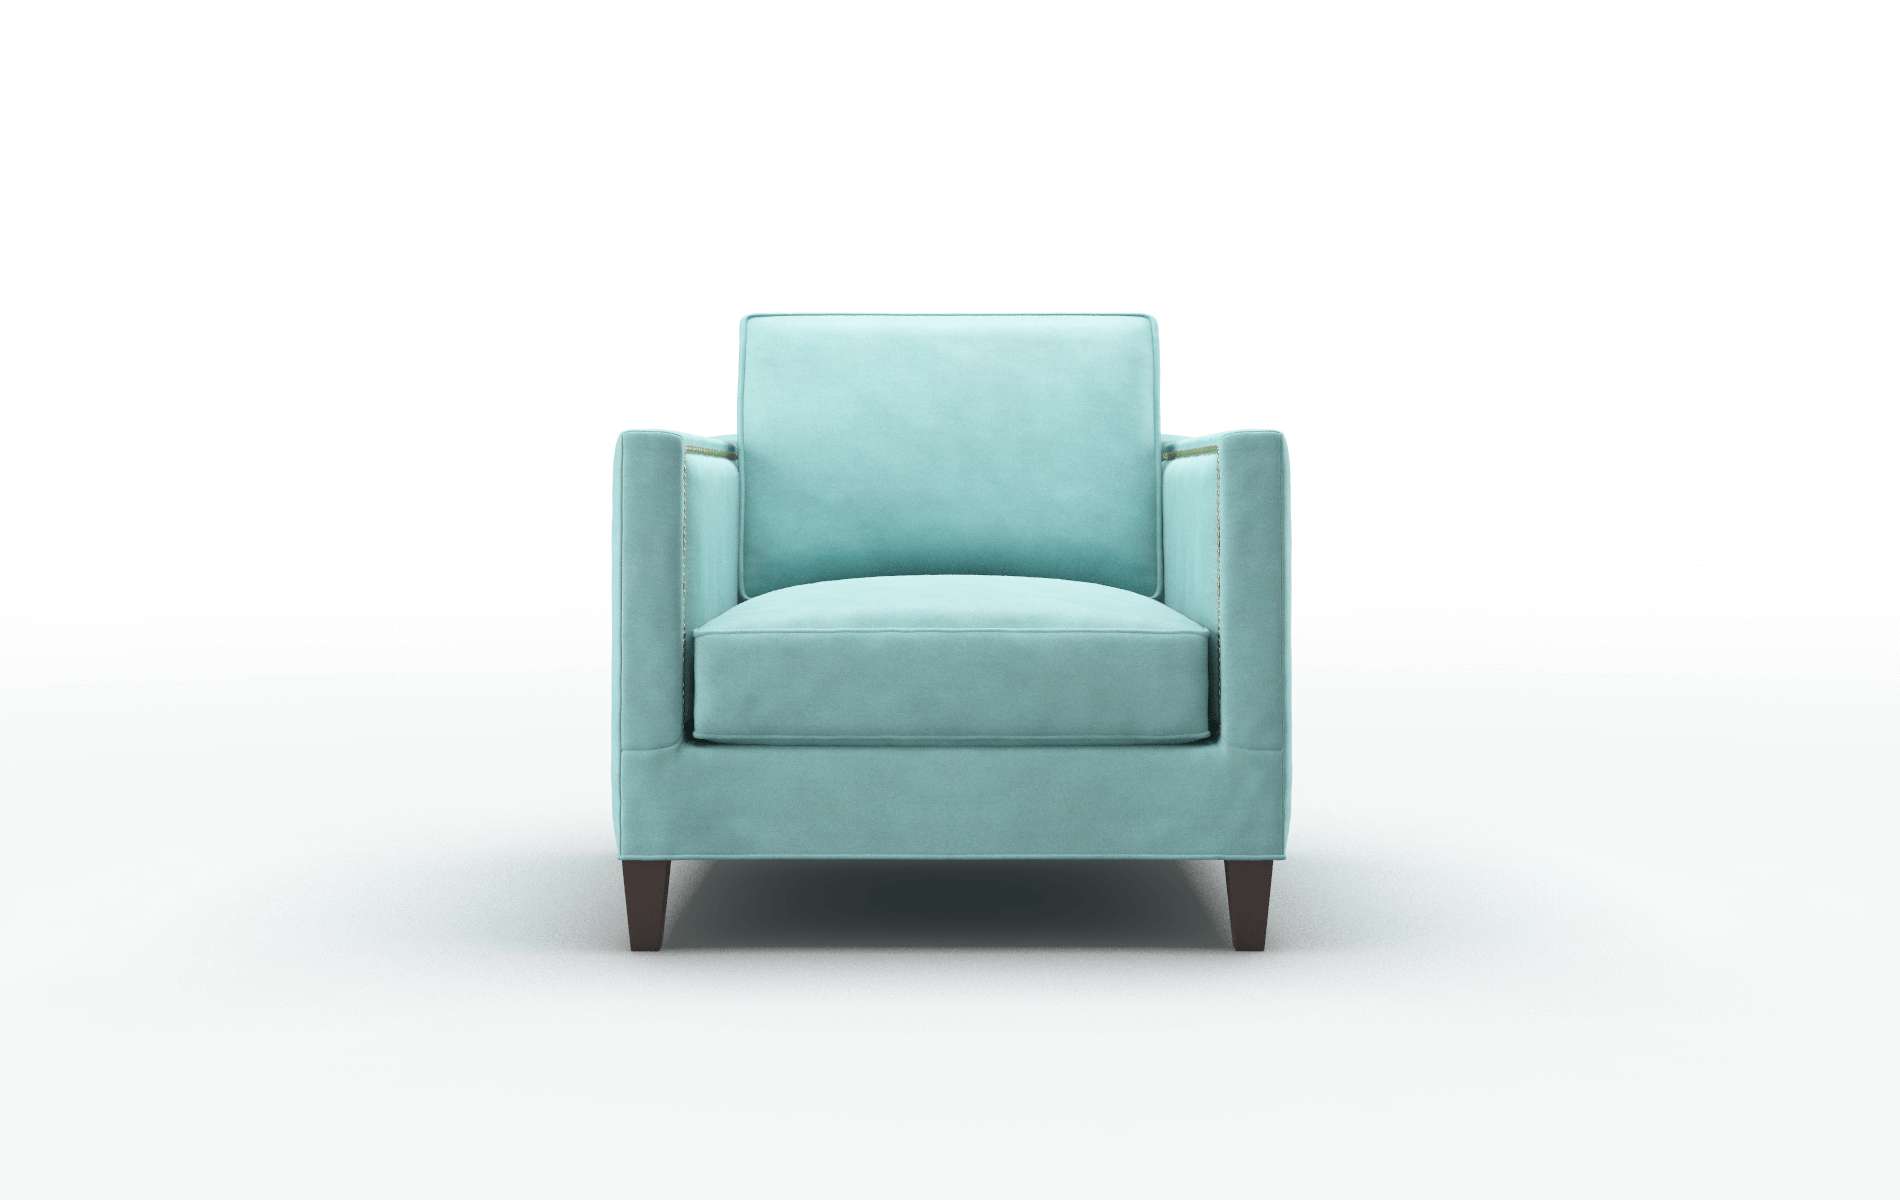 Alps Curious Turquoise chair espresso legs